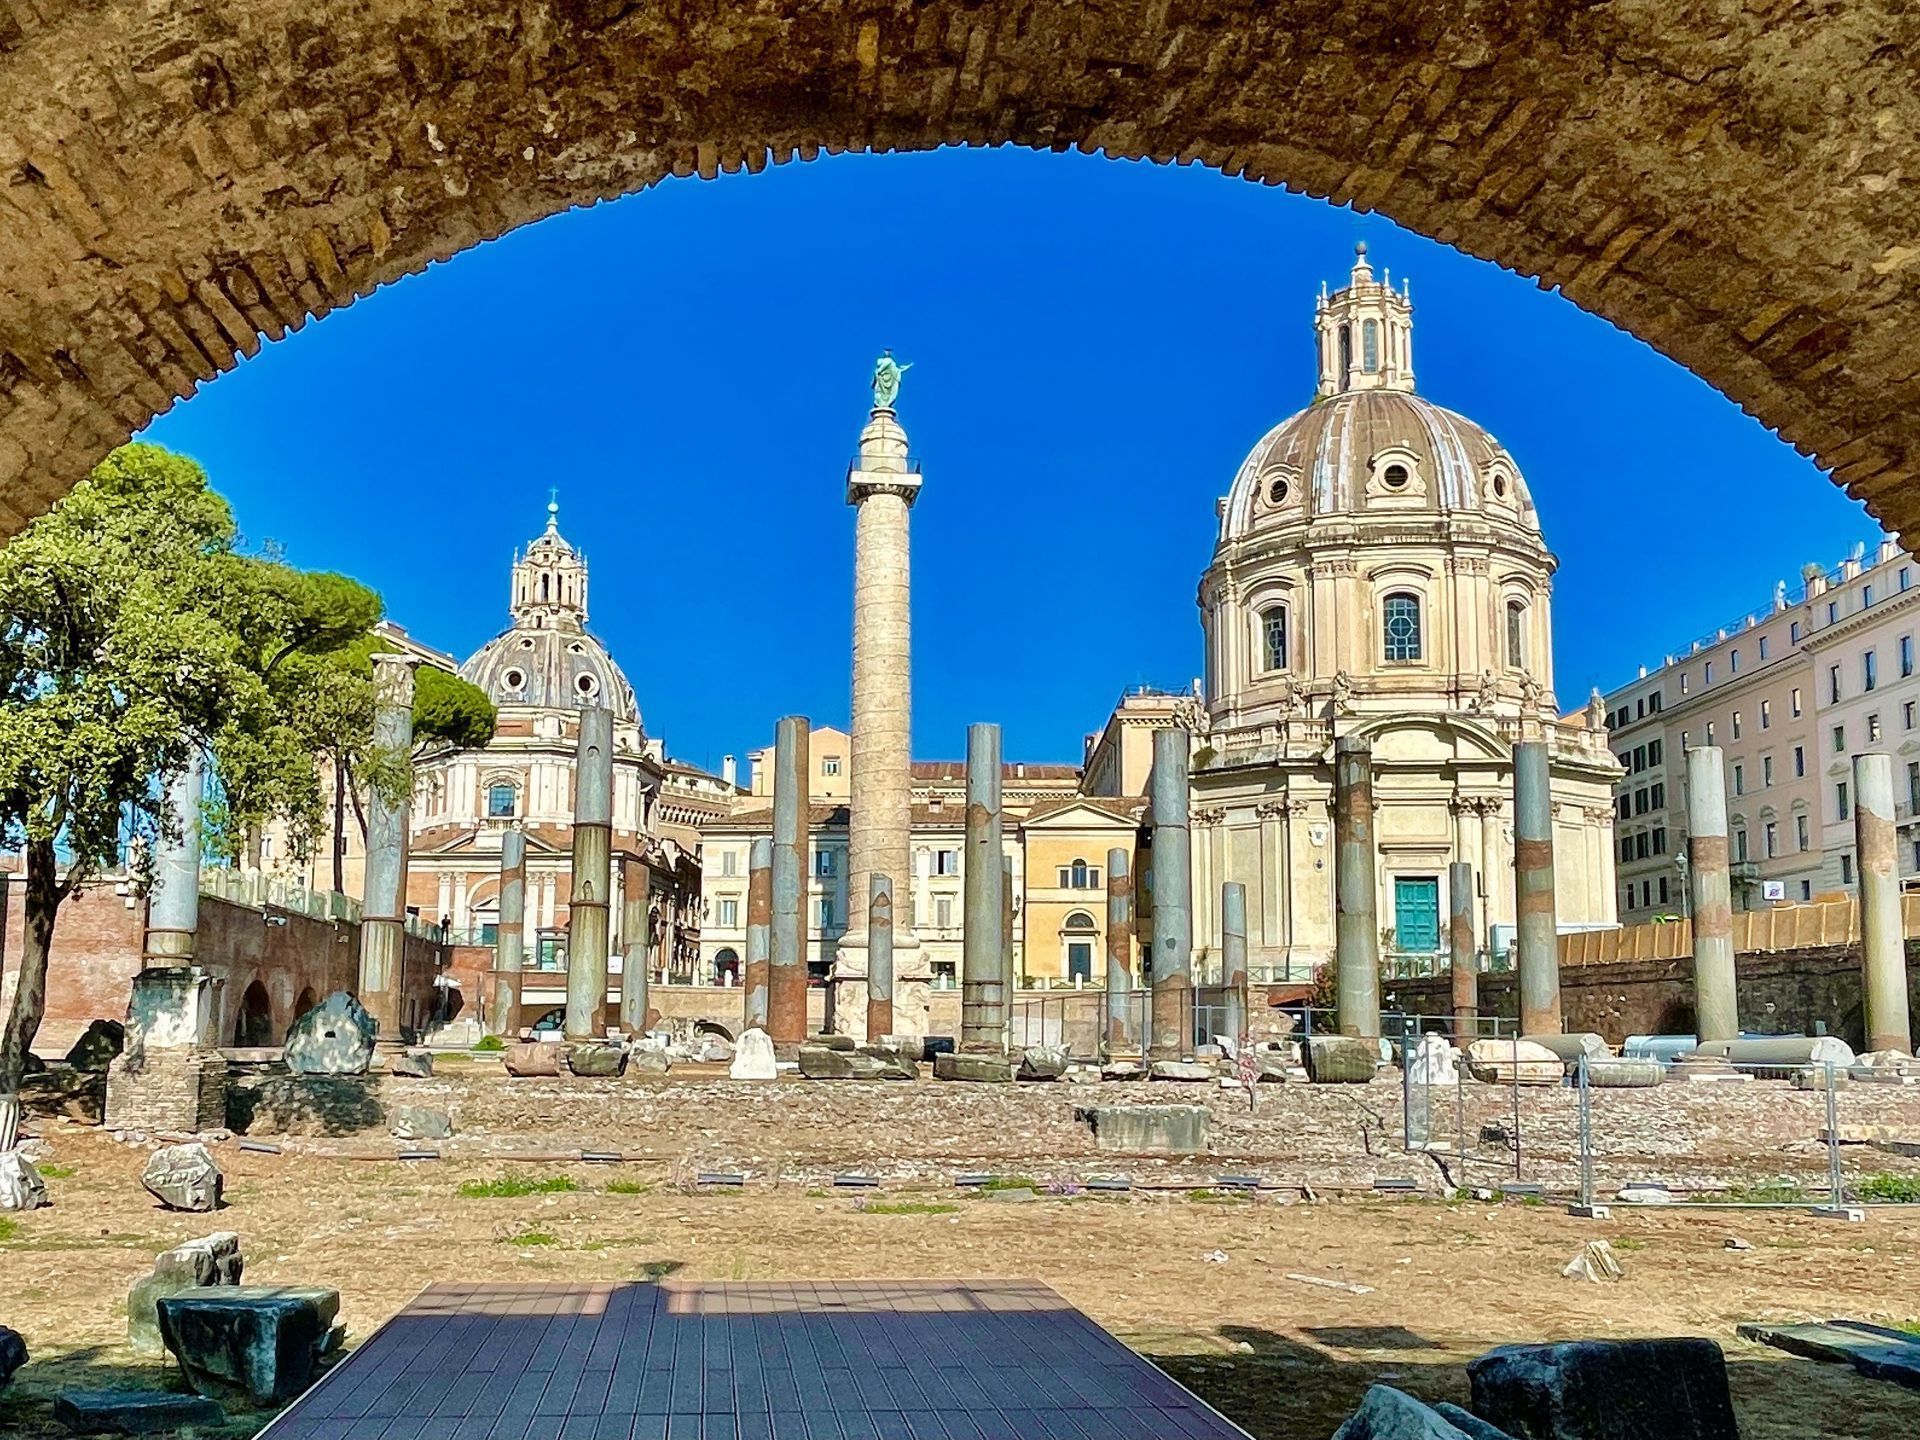 Tour of Ancient Rome, Colosseum, Trajan Column, Roman Forum, Colosseum, and Panoramic Views of Rome